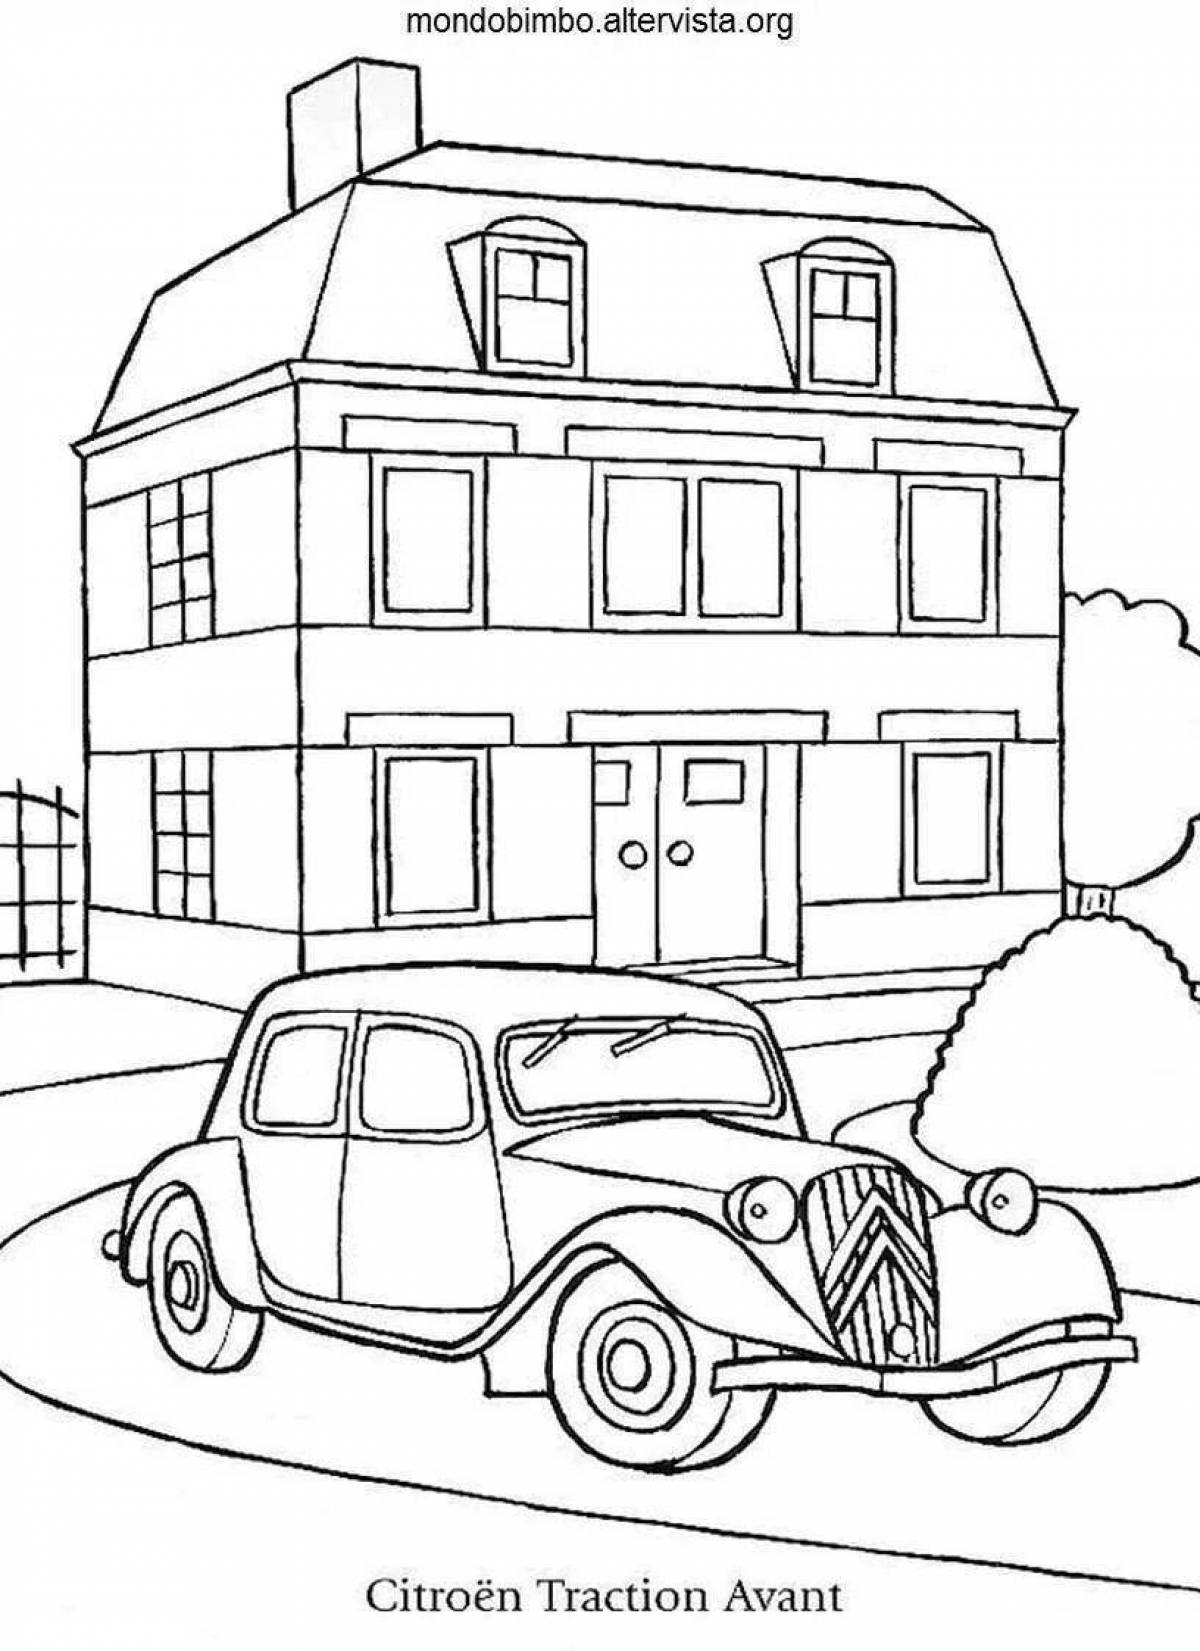 Great garage coloring page